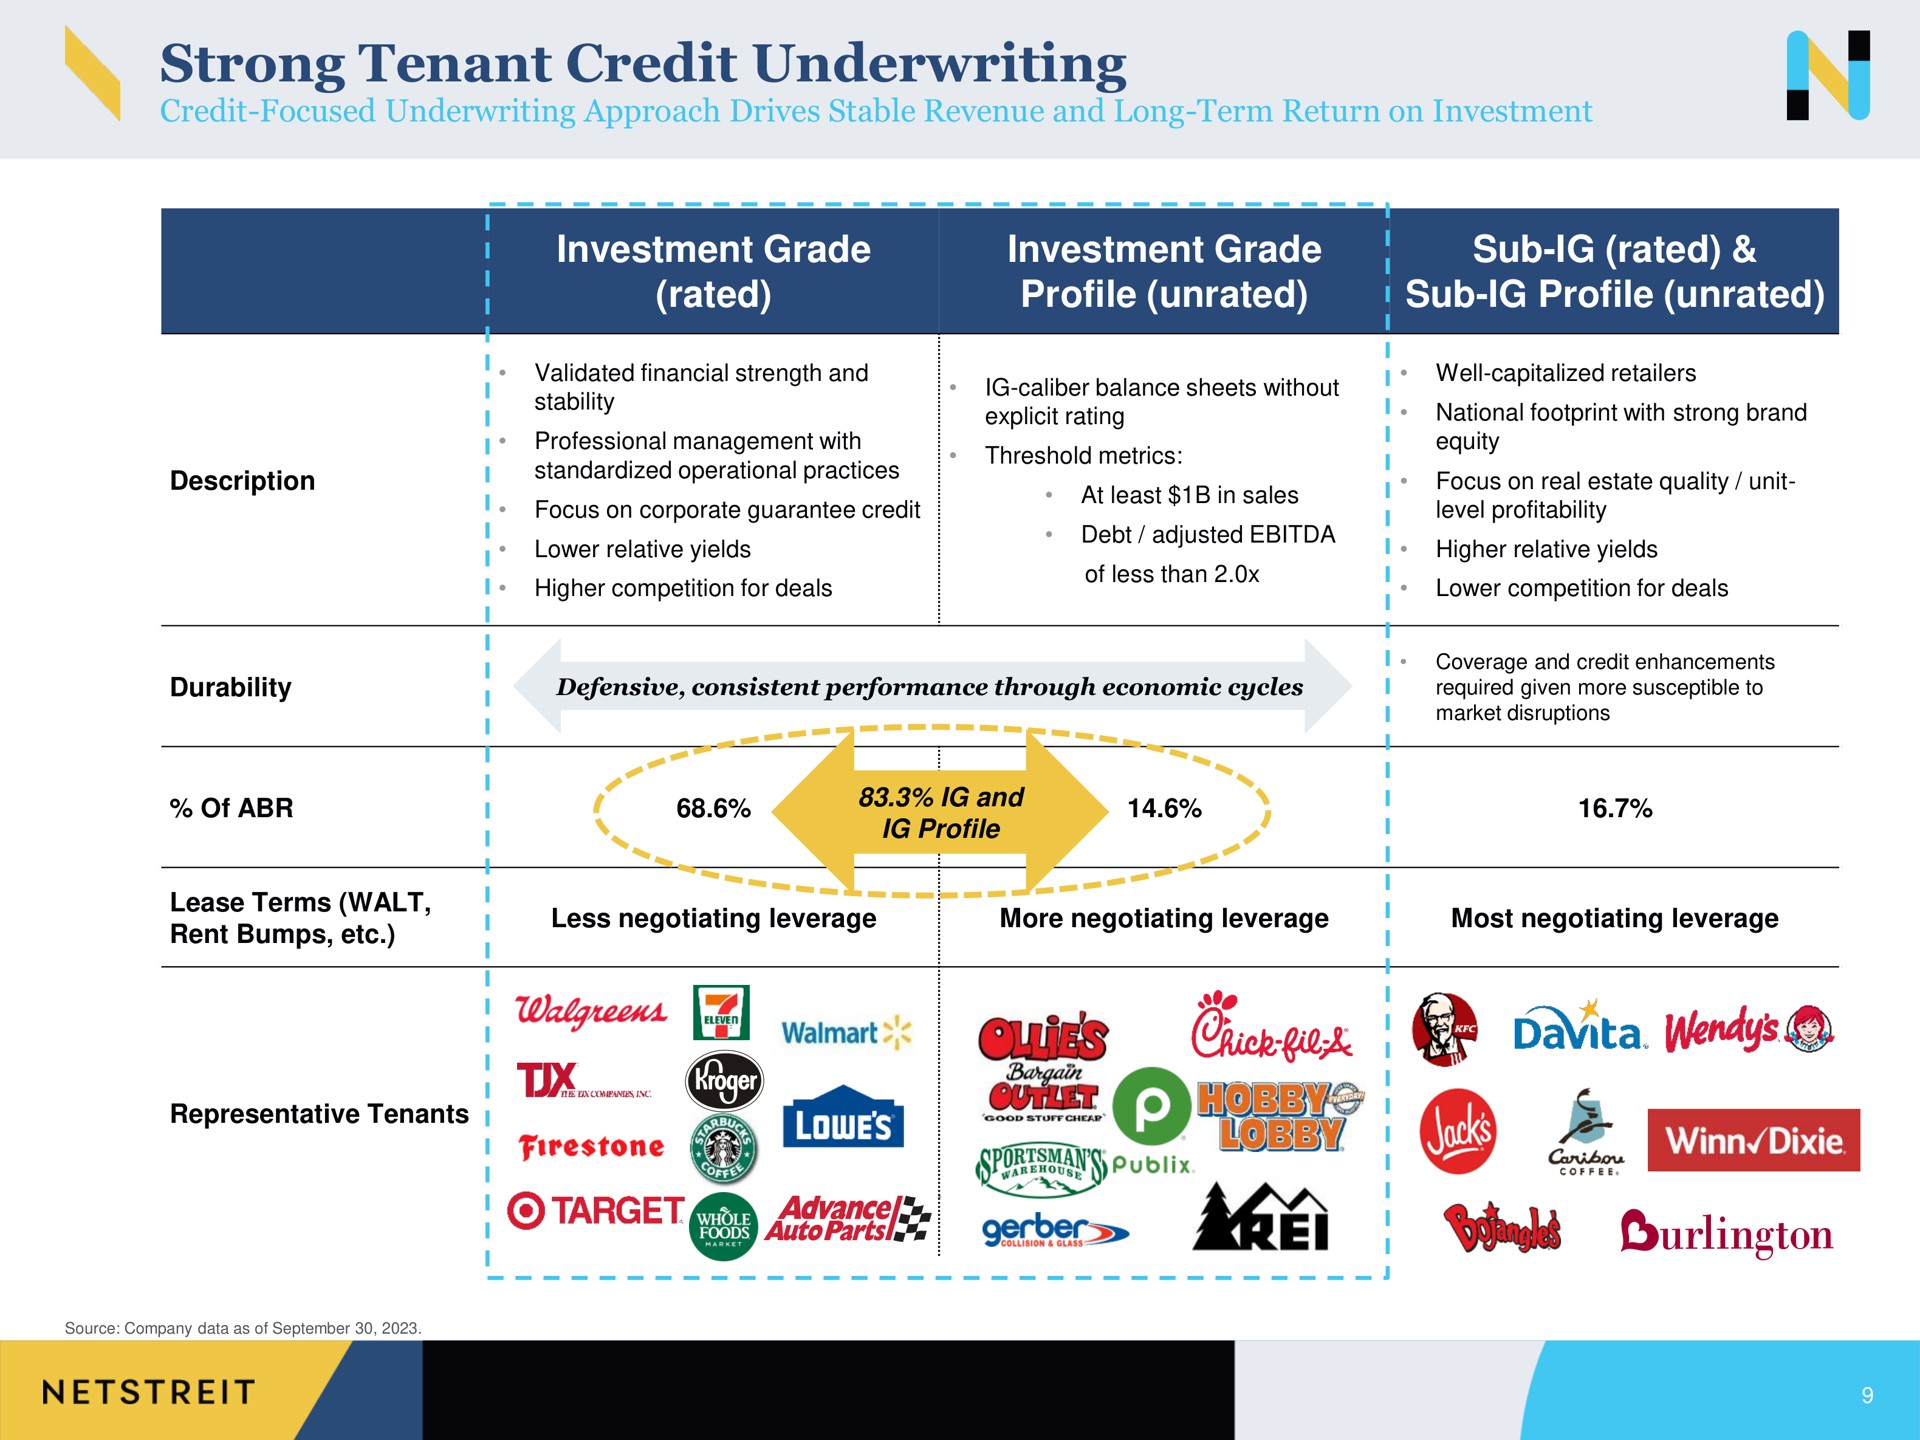 strong tenant credit underwriting investment grade rated investment grade profile unrated sub rated sub profile unrated my advance | Netstreit